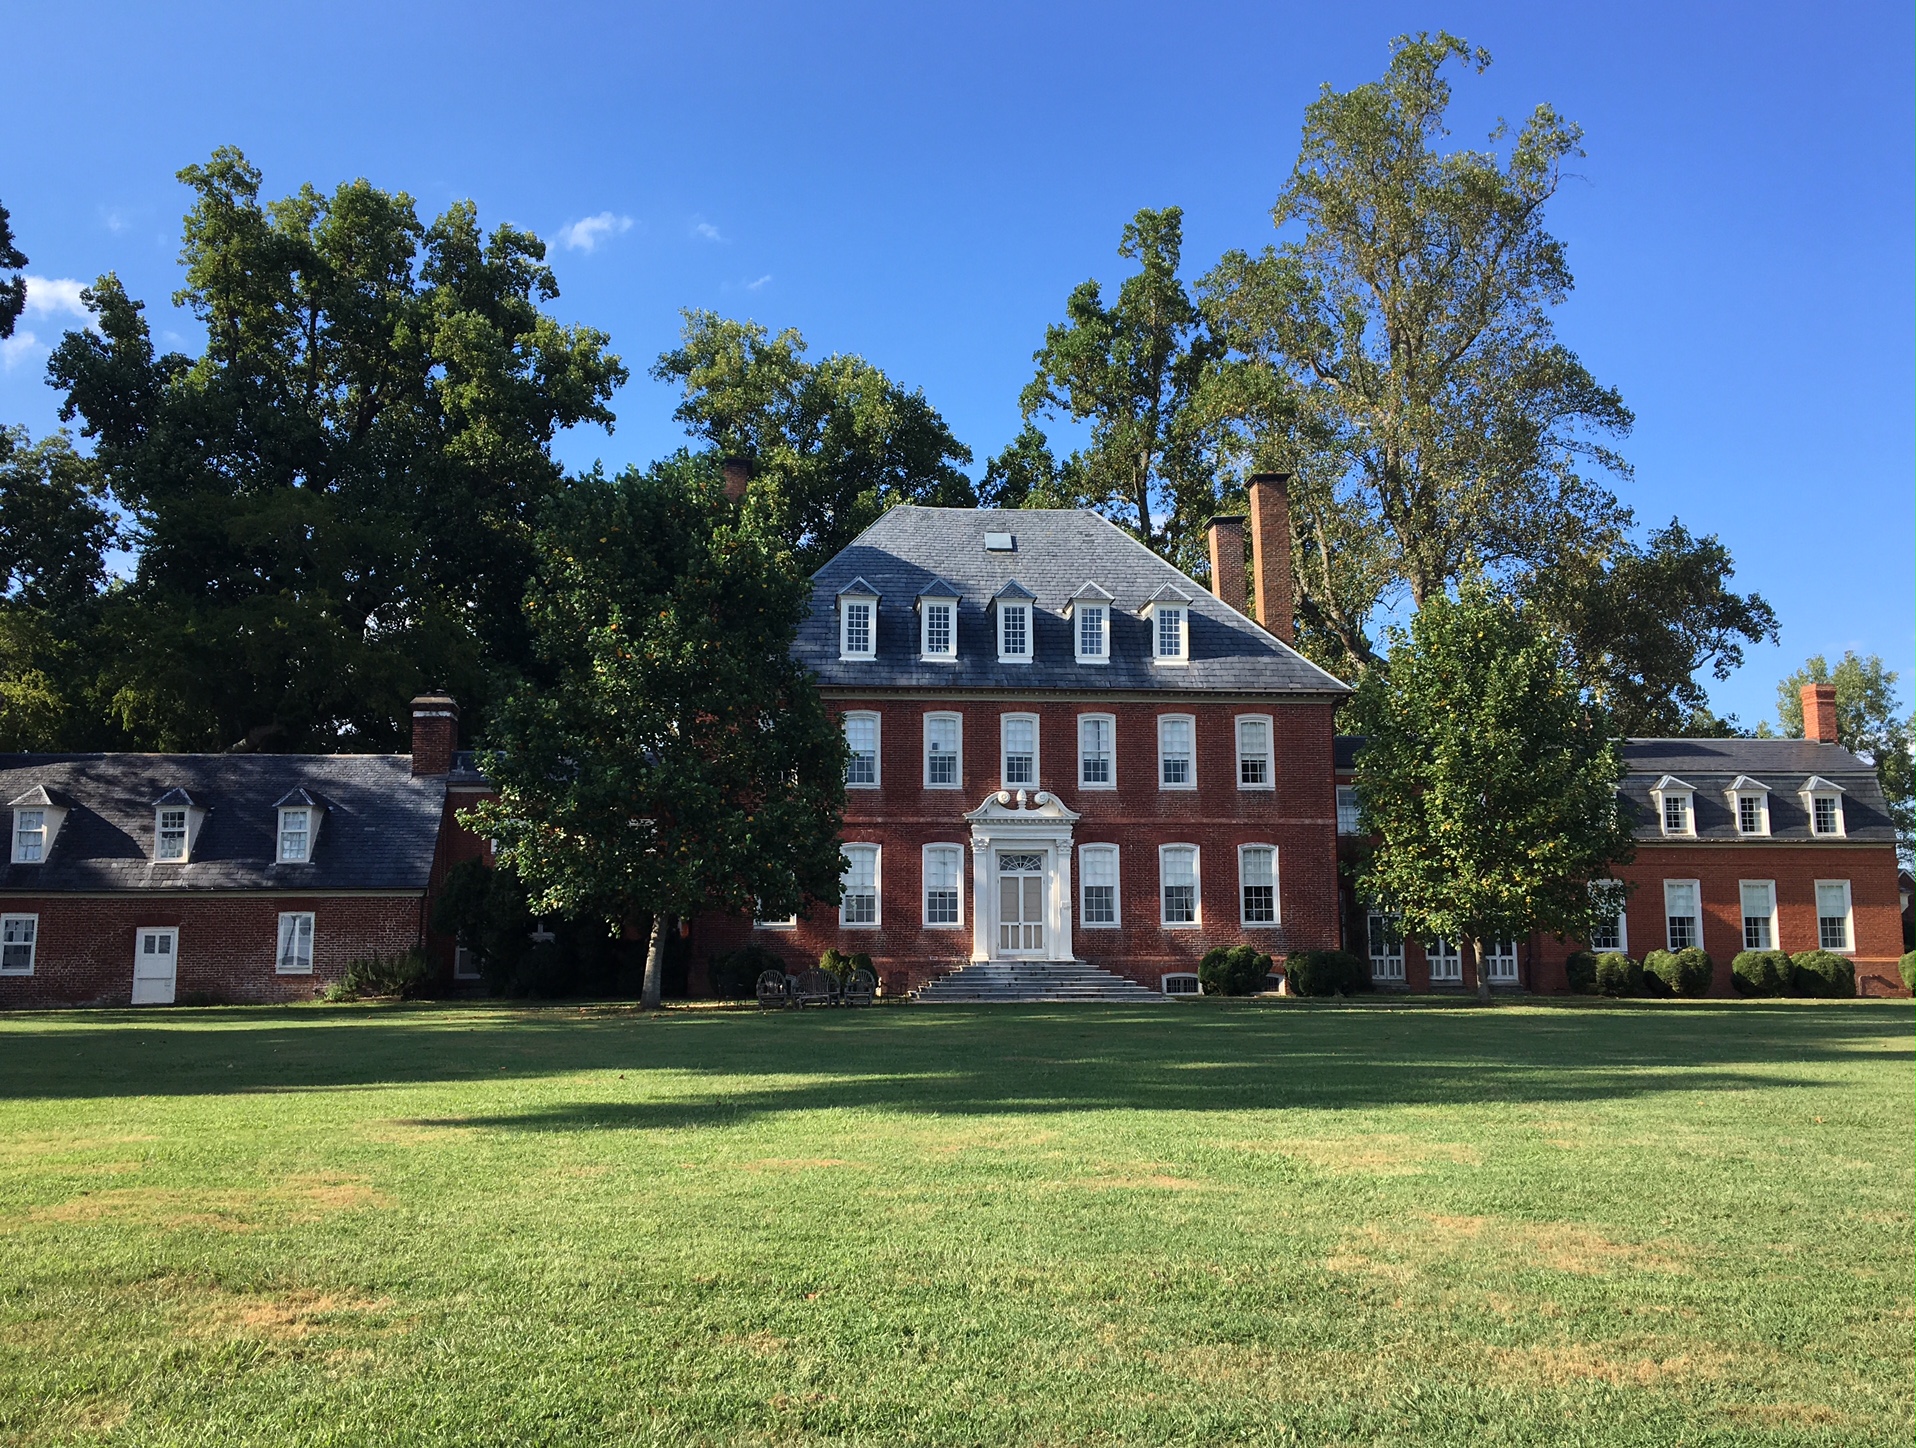 The Westover Plantation has secret passageways that leads to the river and is a fine example of architecture of the 17th century. (Cheryl Welch | Travel Beat Magazine)